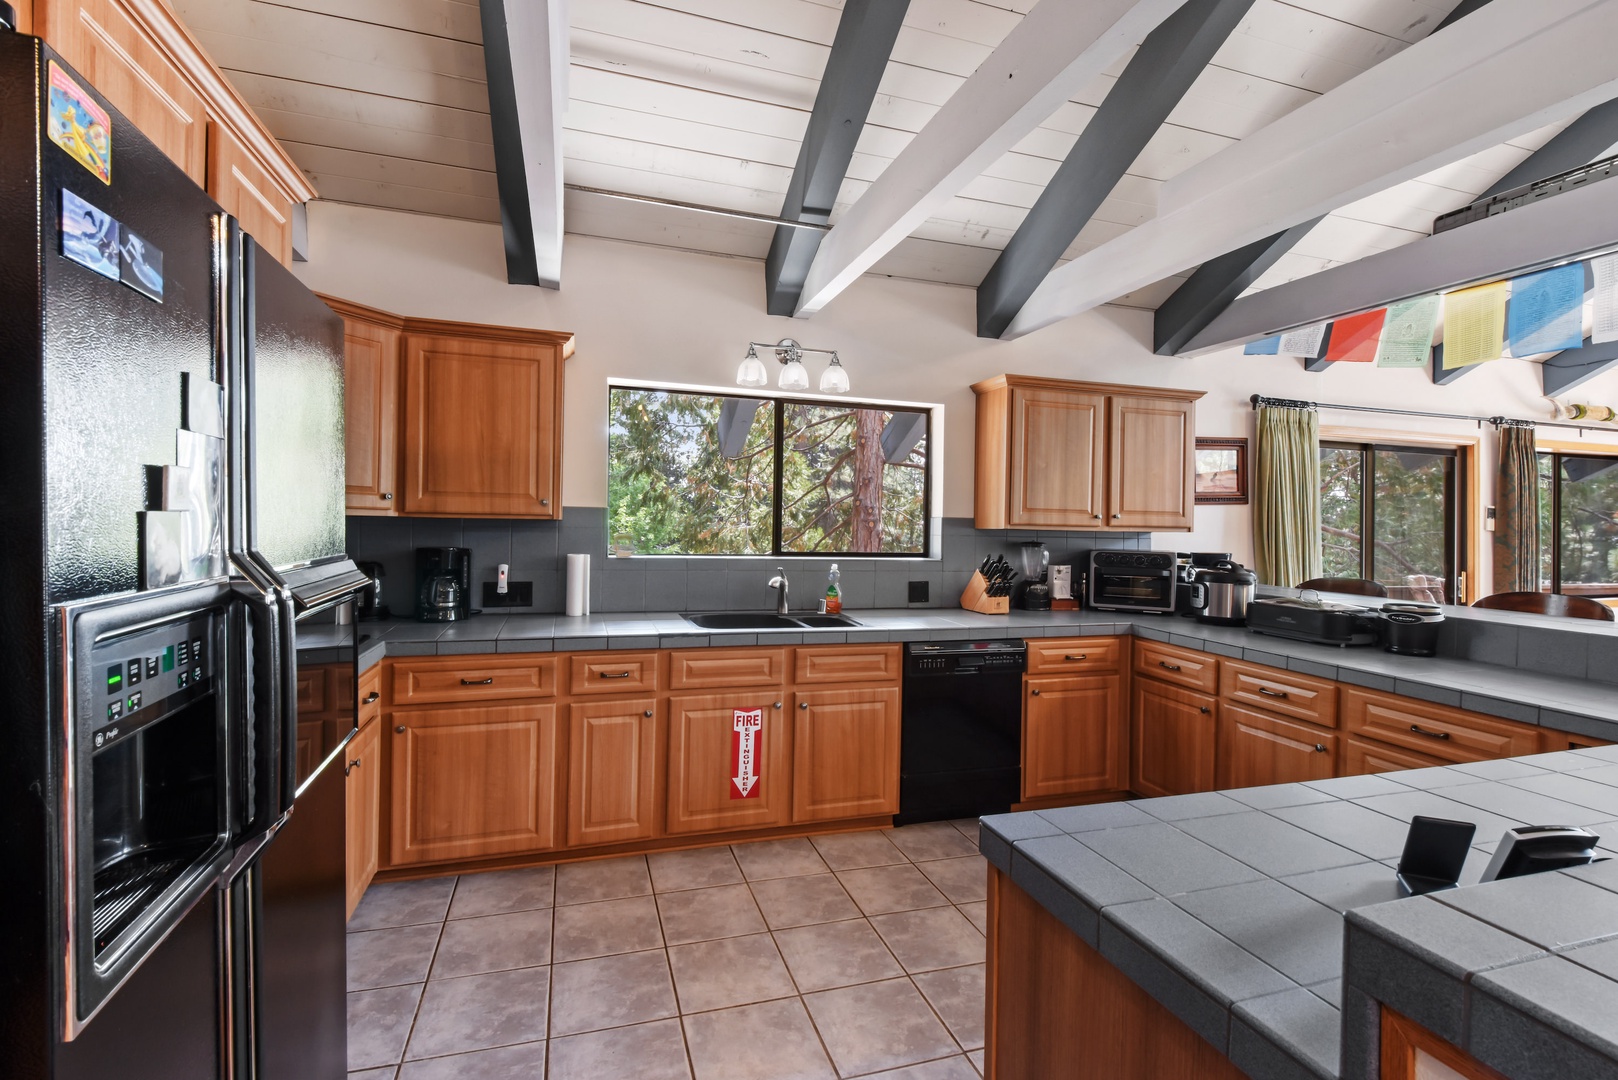 Kitchen with drip coffee maker, toaster oven, blender, slow cooker, and more